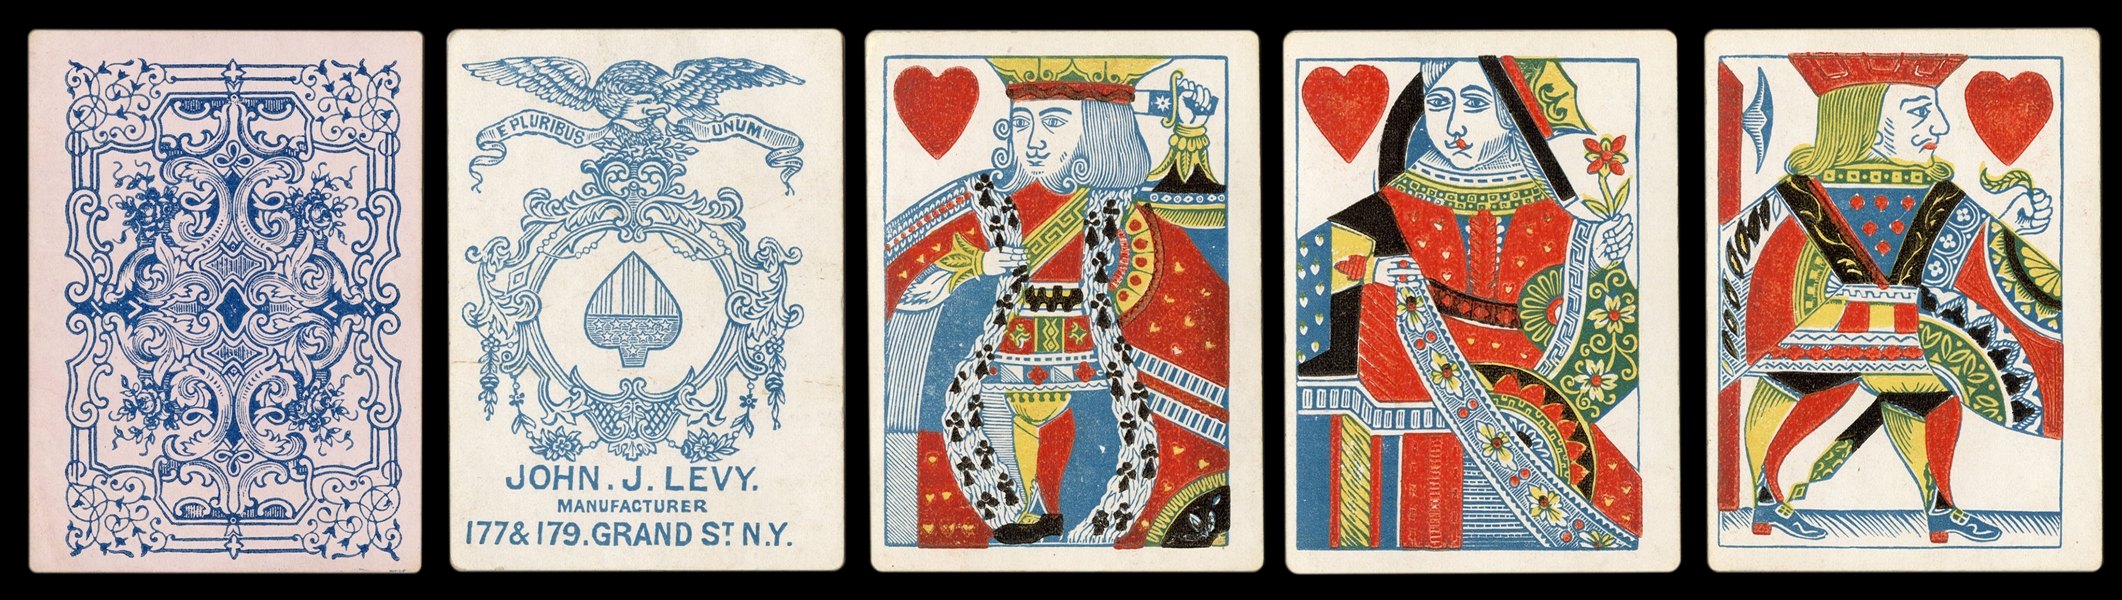  Jno. [John] J. Levy Playing Cards. New York, ca. 1860s. 52 ...